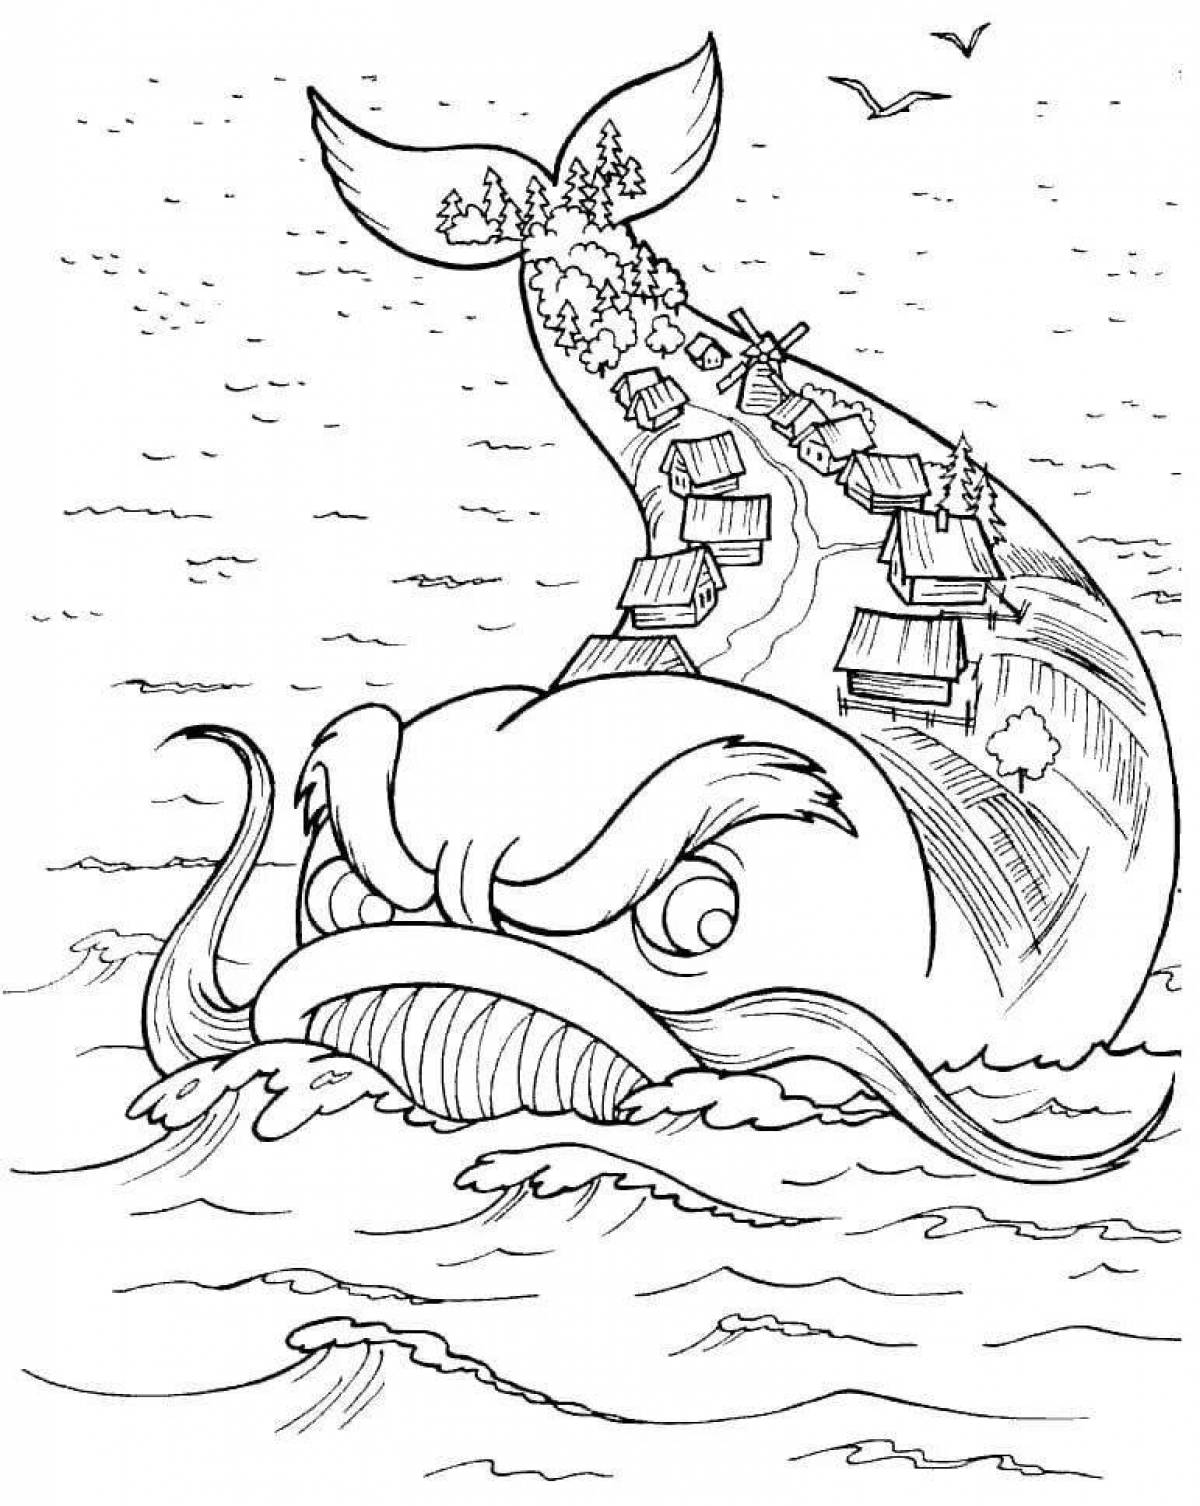 Coloring page of the wild little humpbacked horse